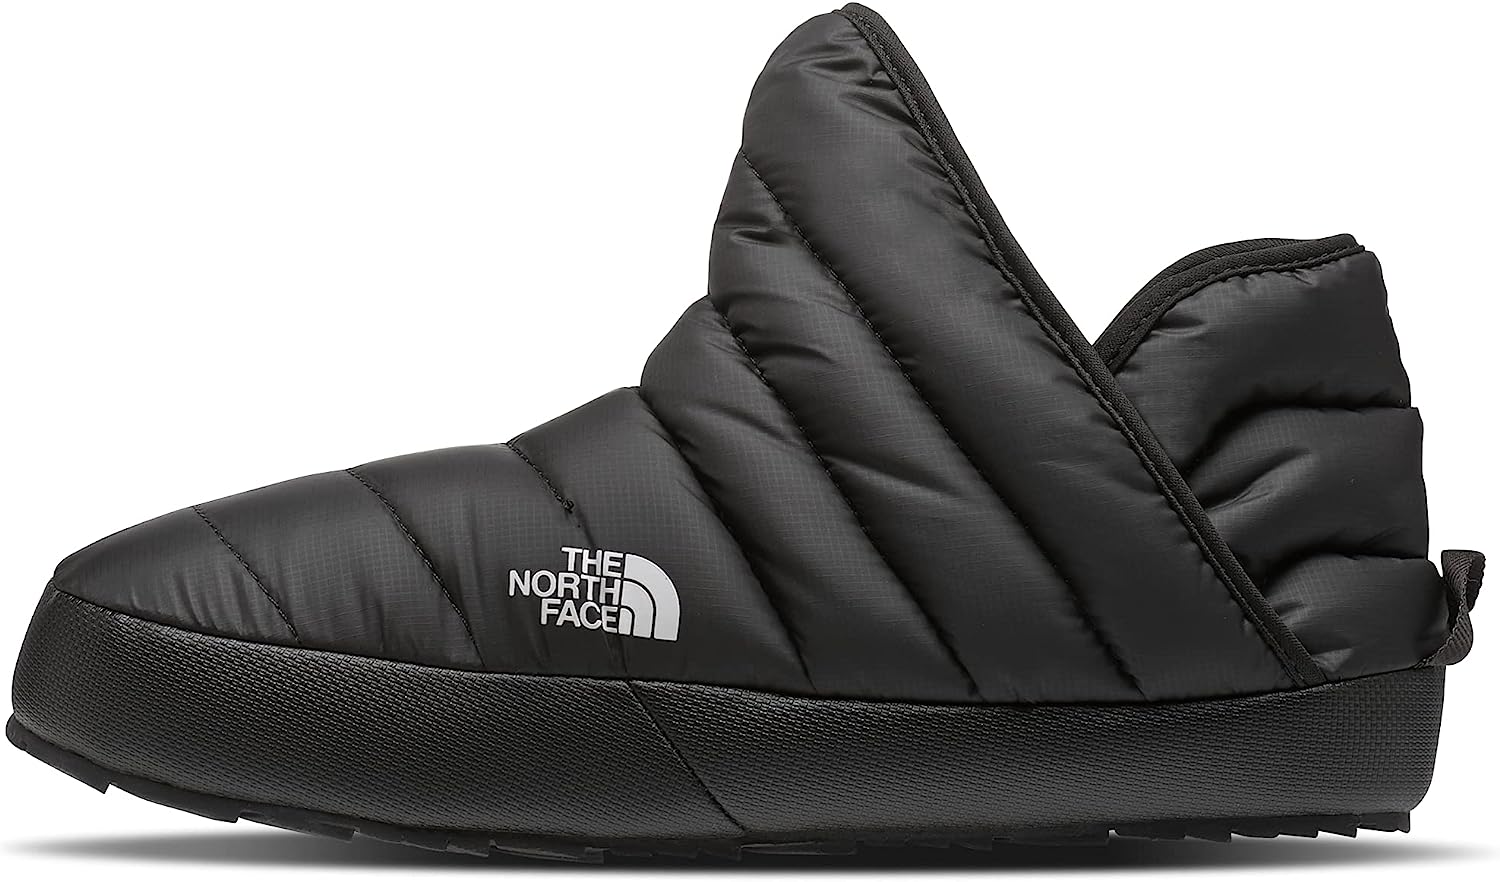 THE NORTH FACE Thermoball Traction Bootie Womens Slippers